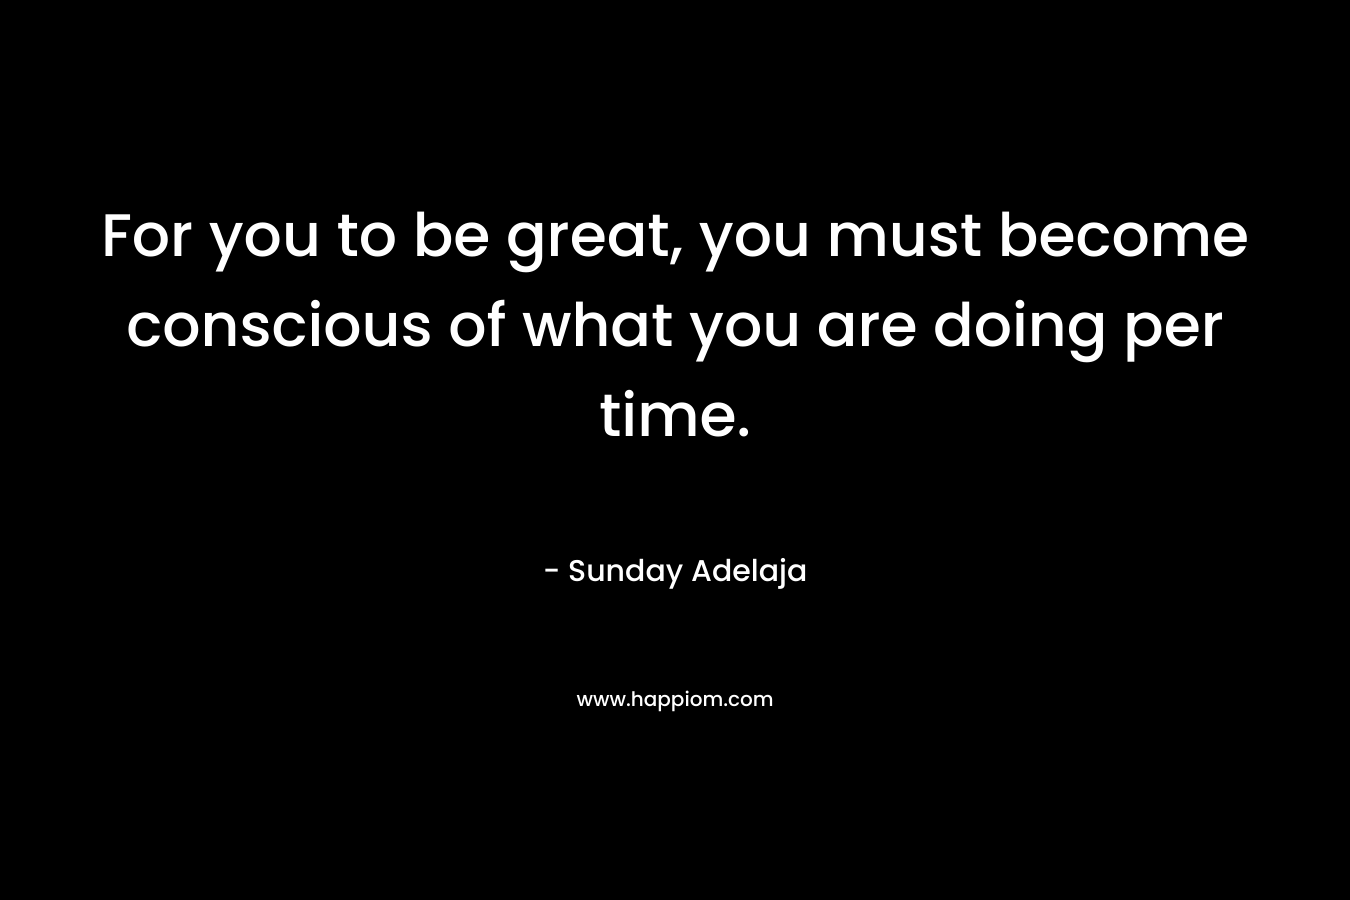 For you to be great, you must become conscious of what you are doing per time.